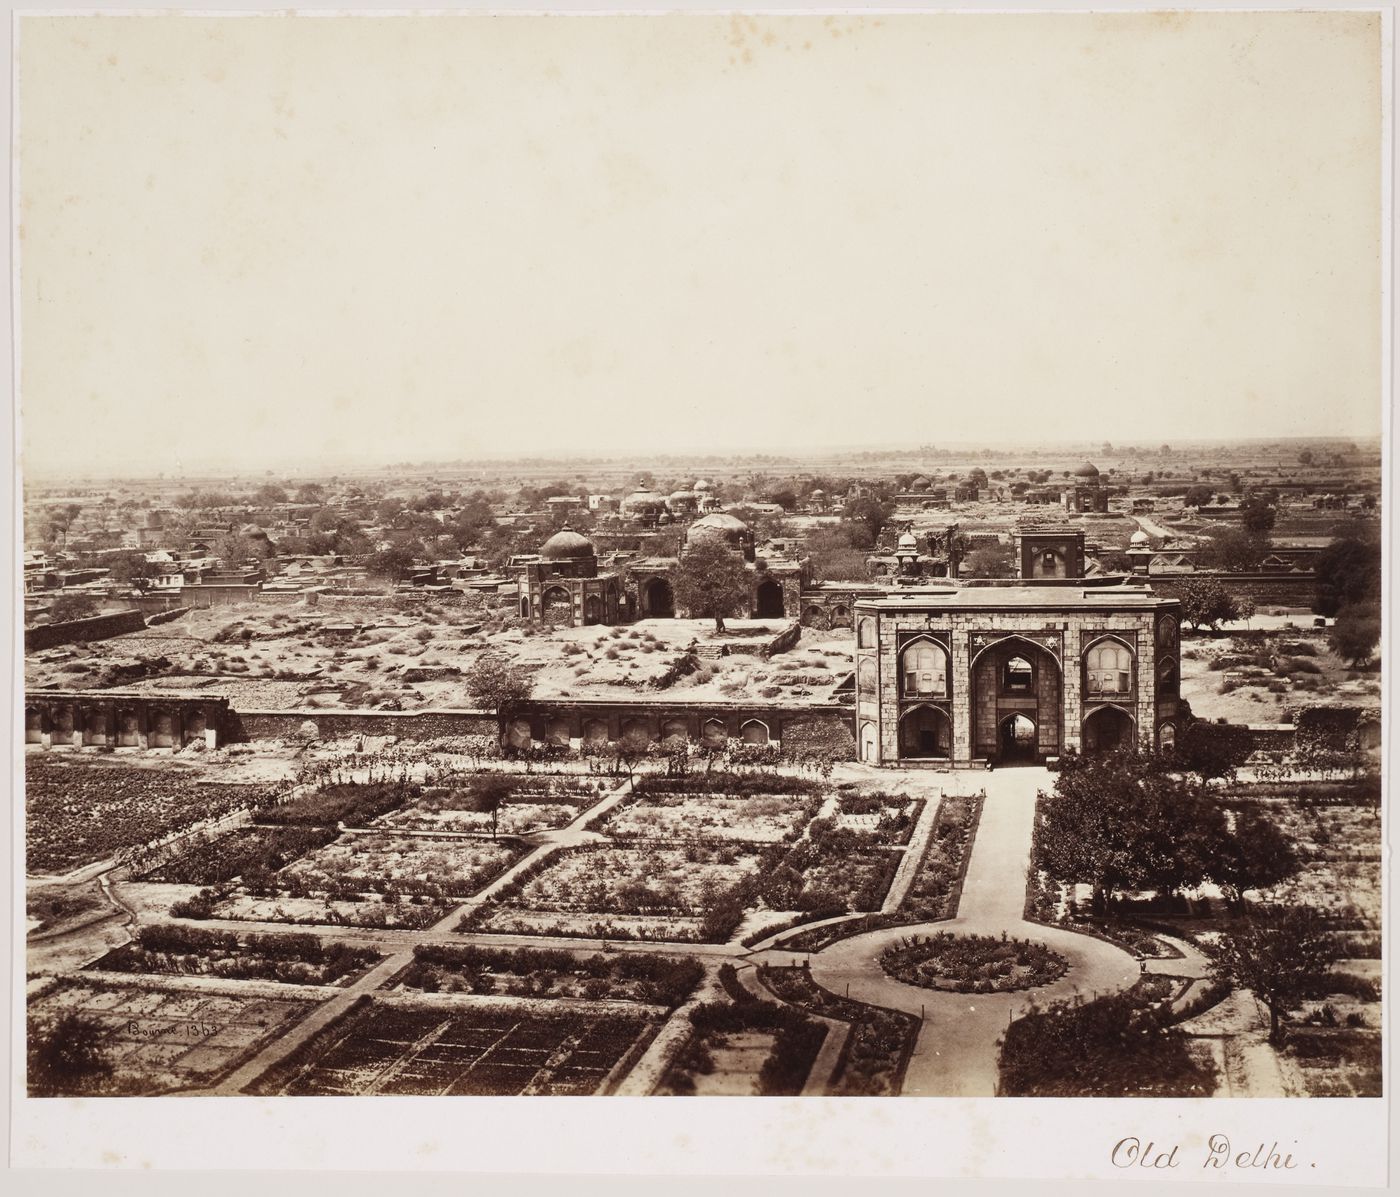 View showing a gateway, the remains of fortifications, and formal gardens in the foreground, Delhi, India